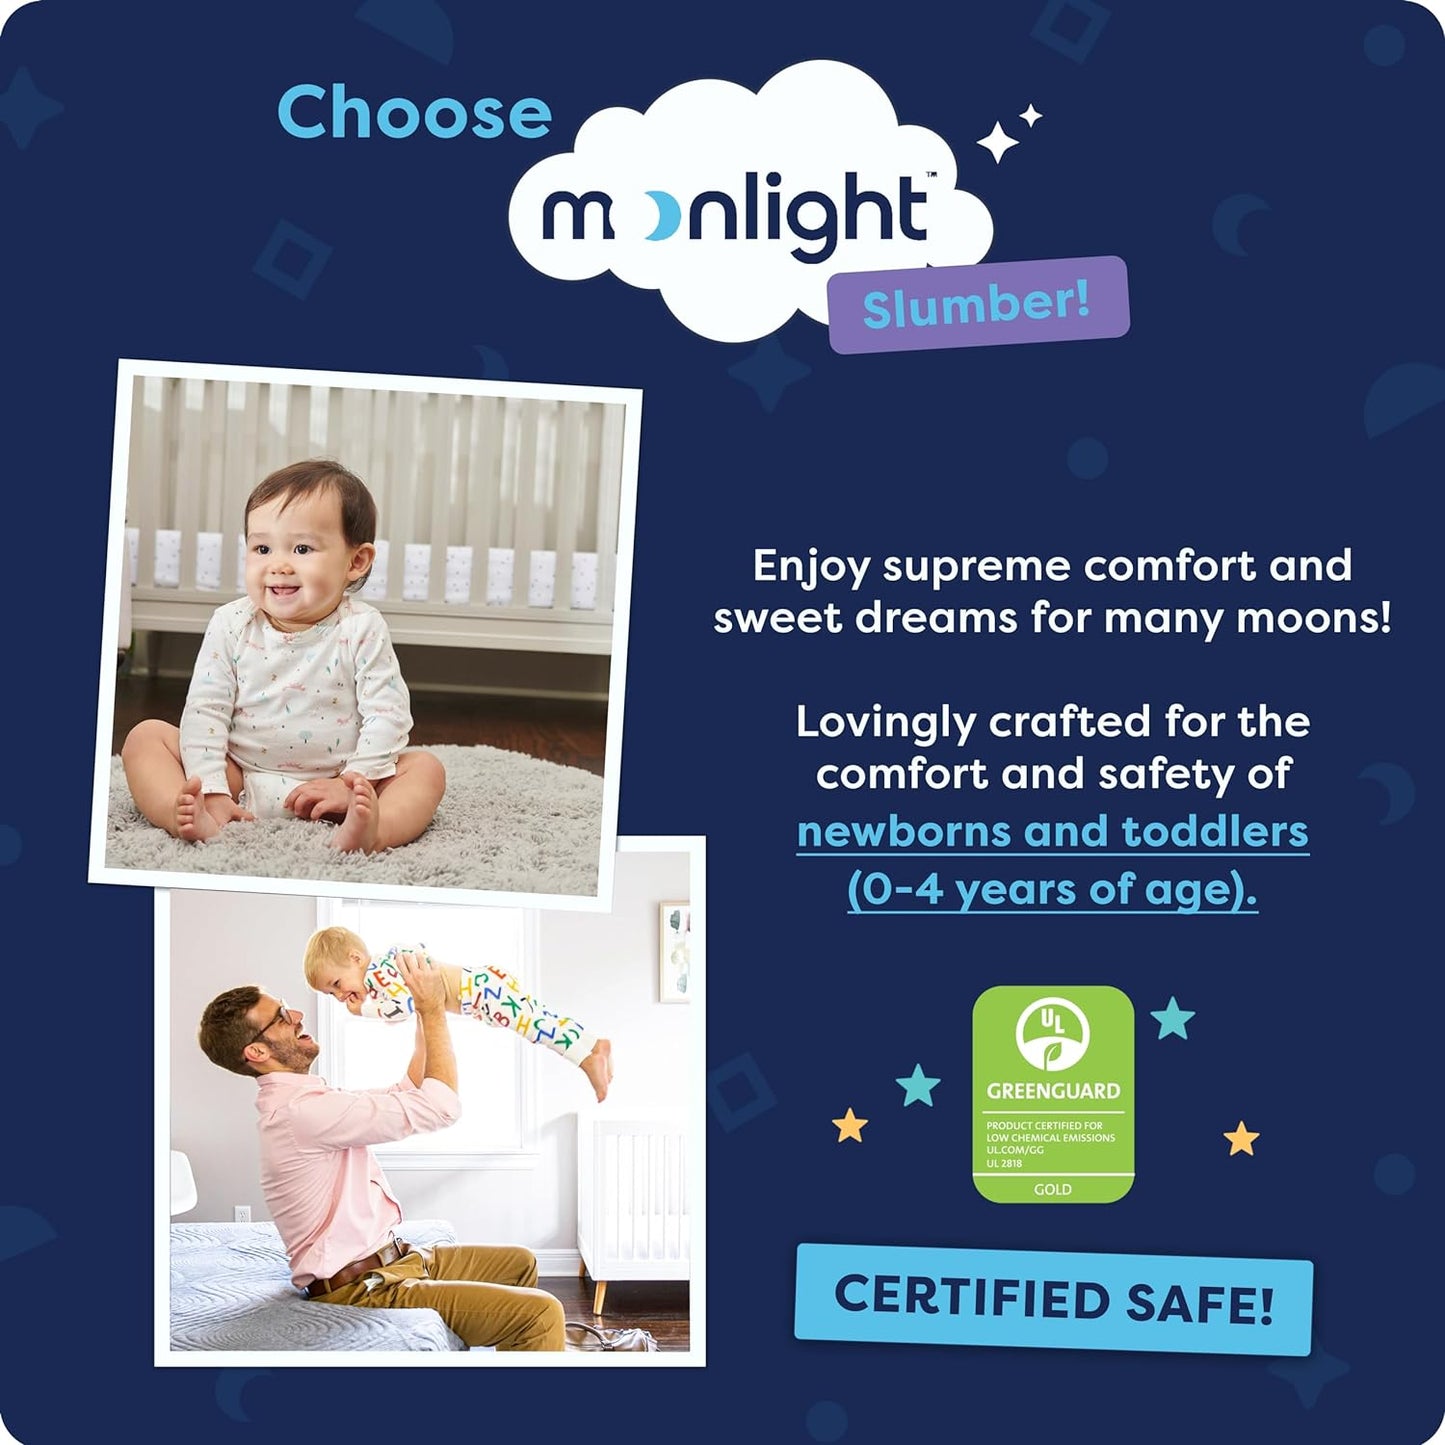 Moonlight Slumber Air Crib Mattress - Breathable Crib Mattress for Baby and Toddler - Innovative Breathe-Thru Open Core Technology for Infant Safety and Comfort - Dual-Sided, Waterproof, 5.5in.